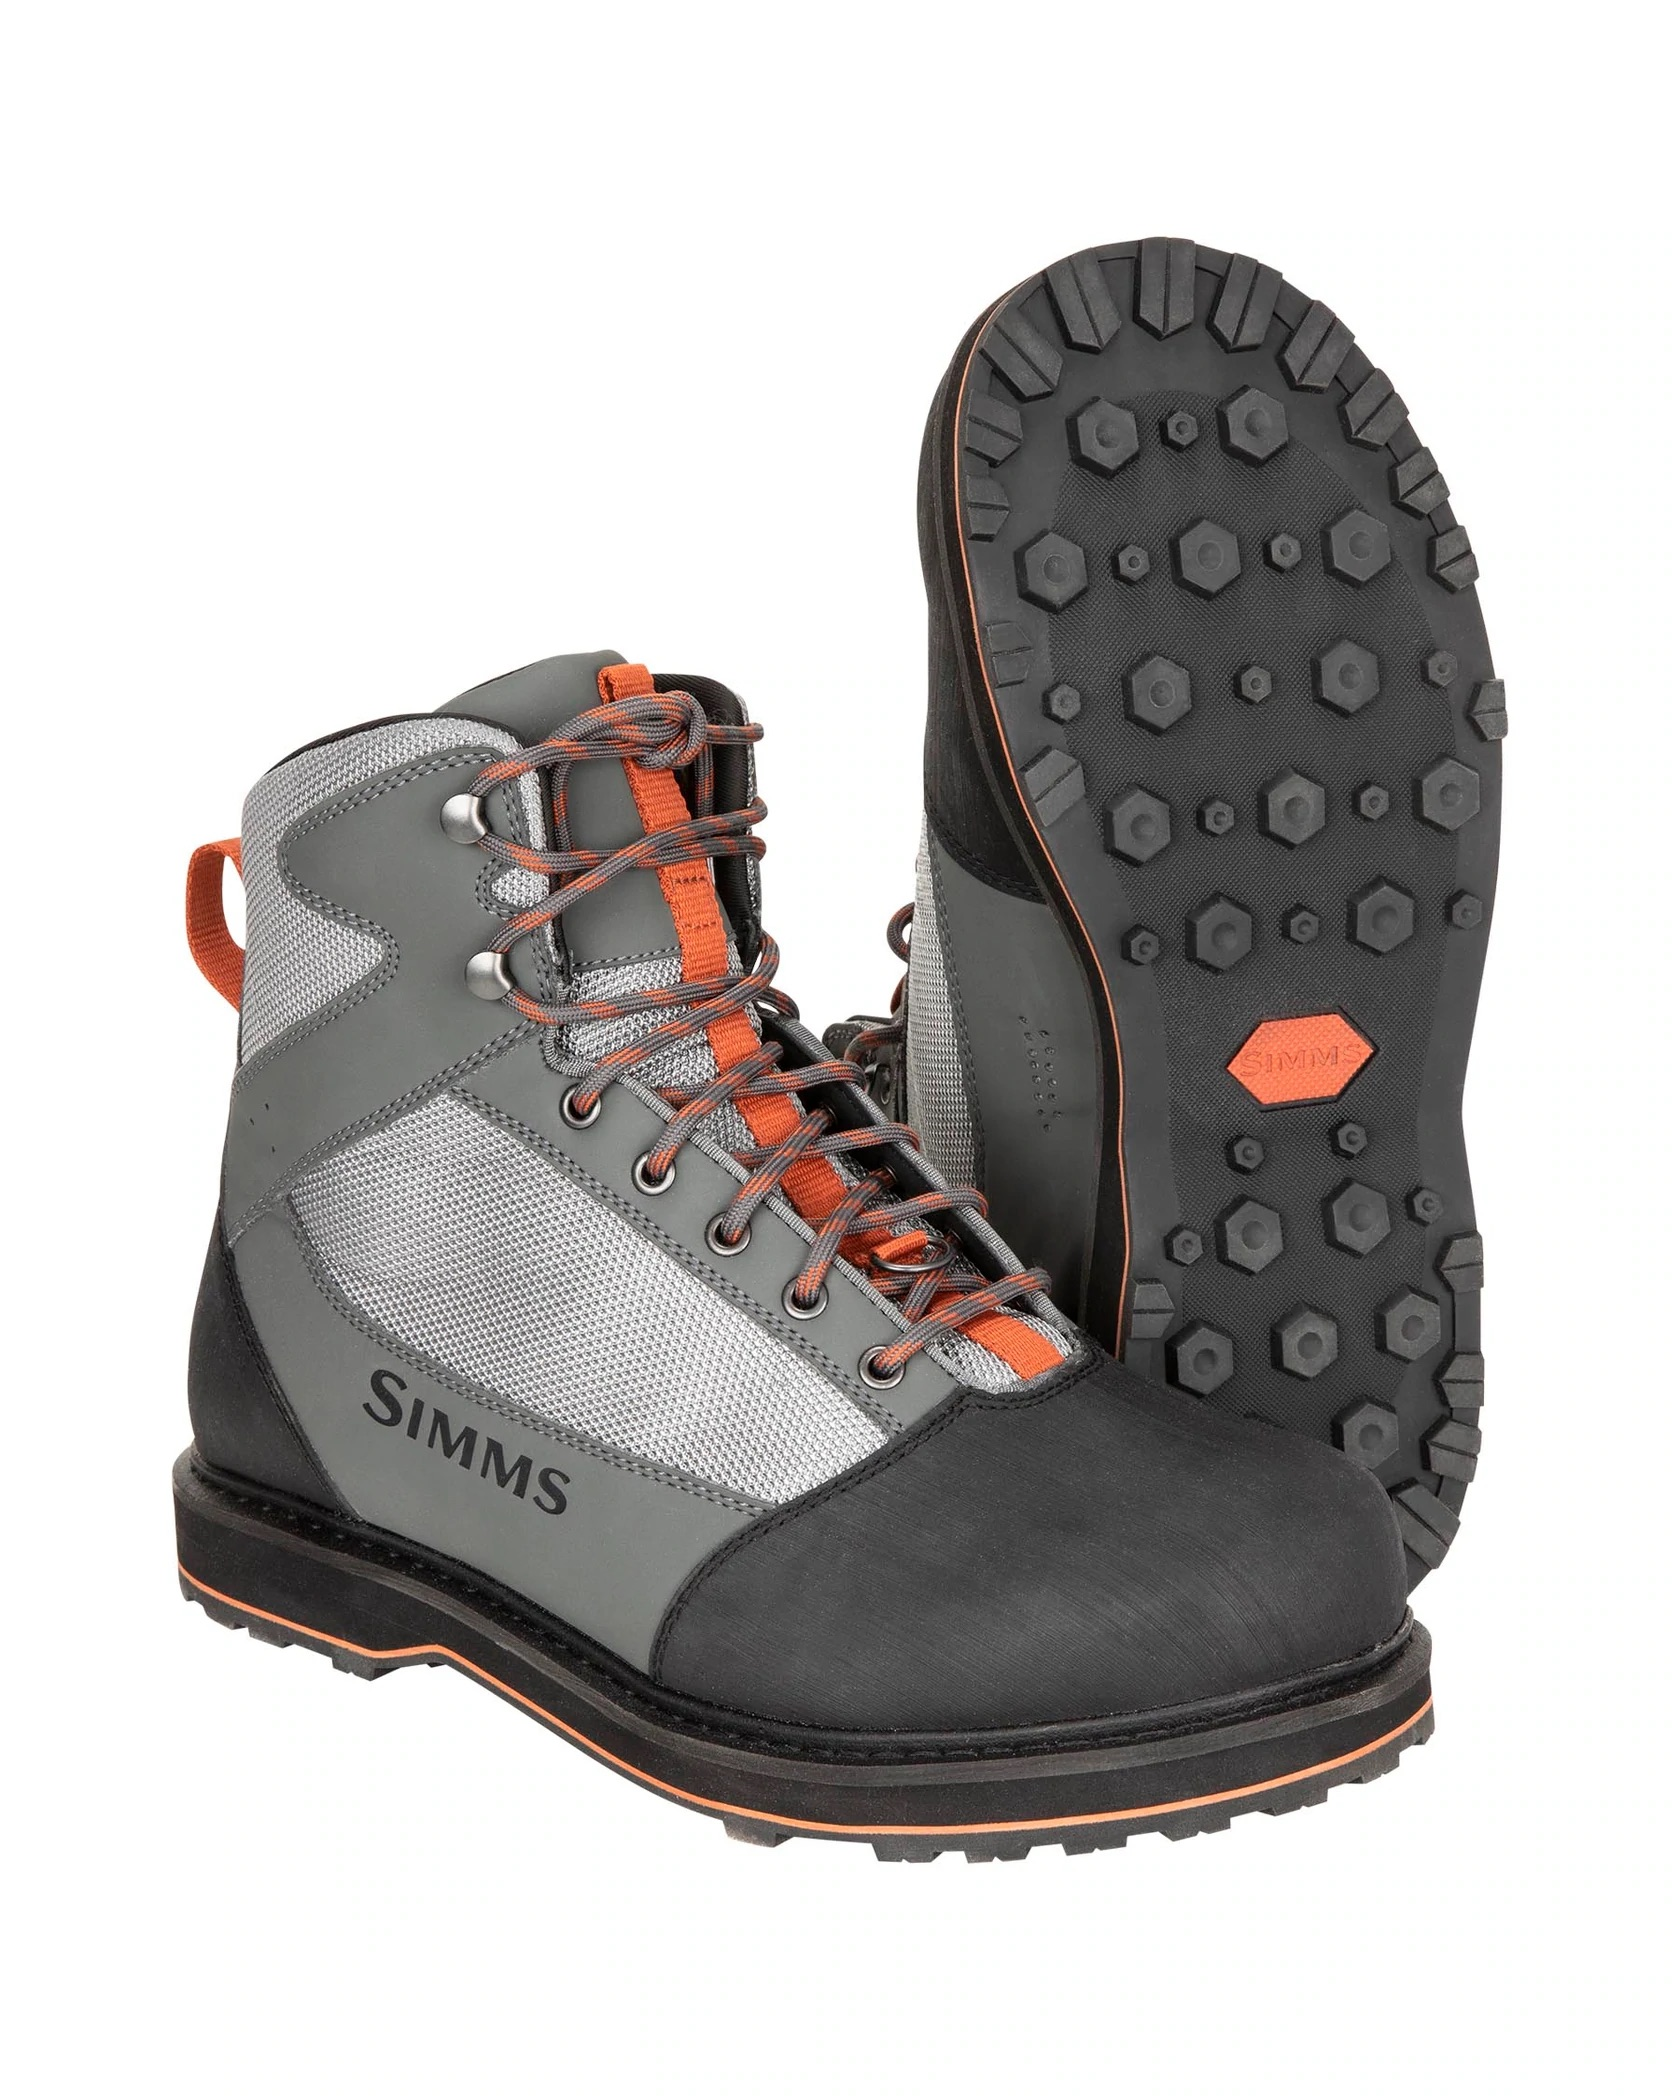 Simms Tributary Boot - Rubber - Size 13